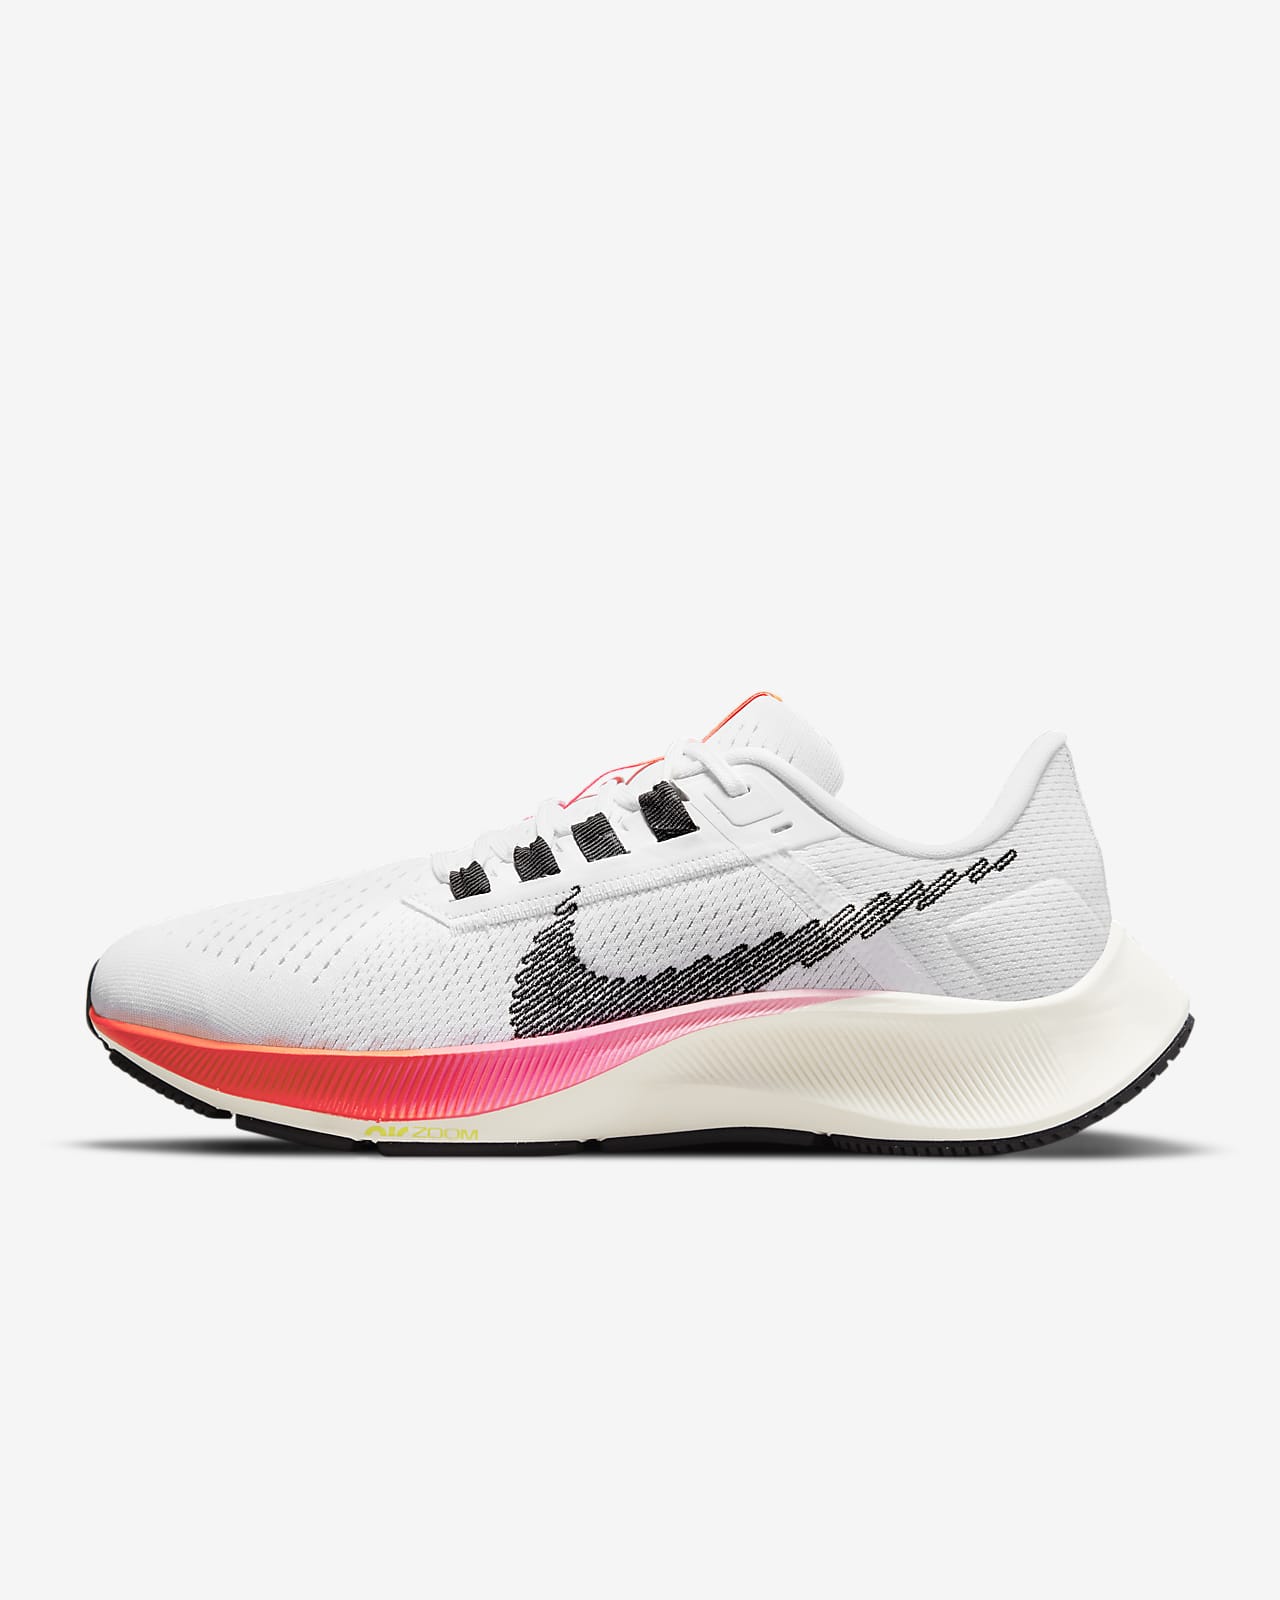 nike womens running shoes sale philippines